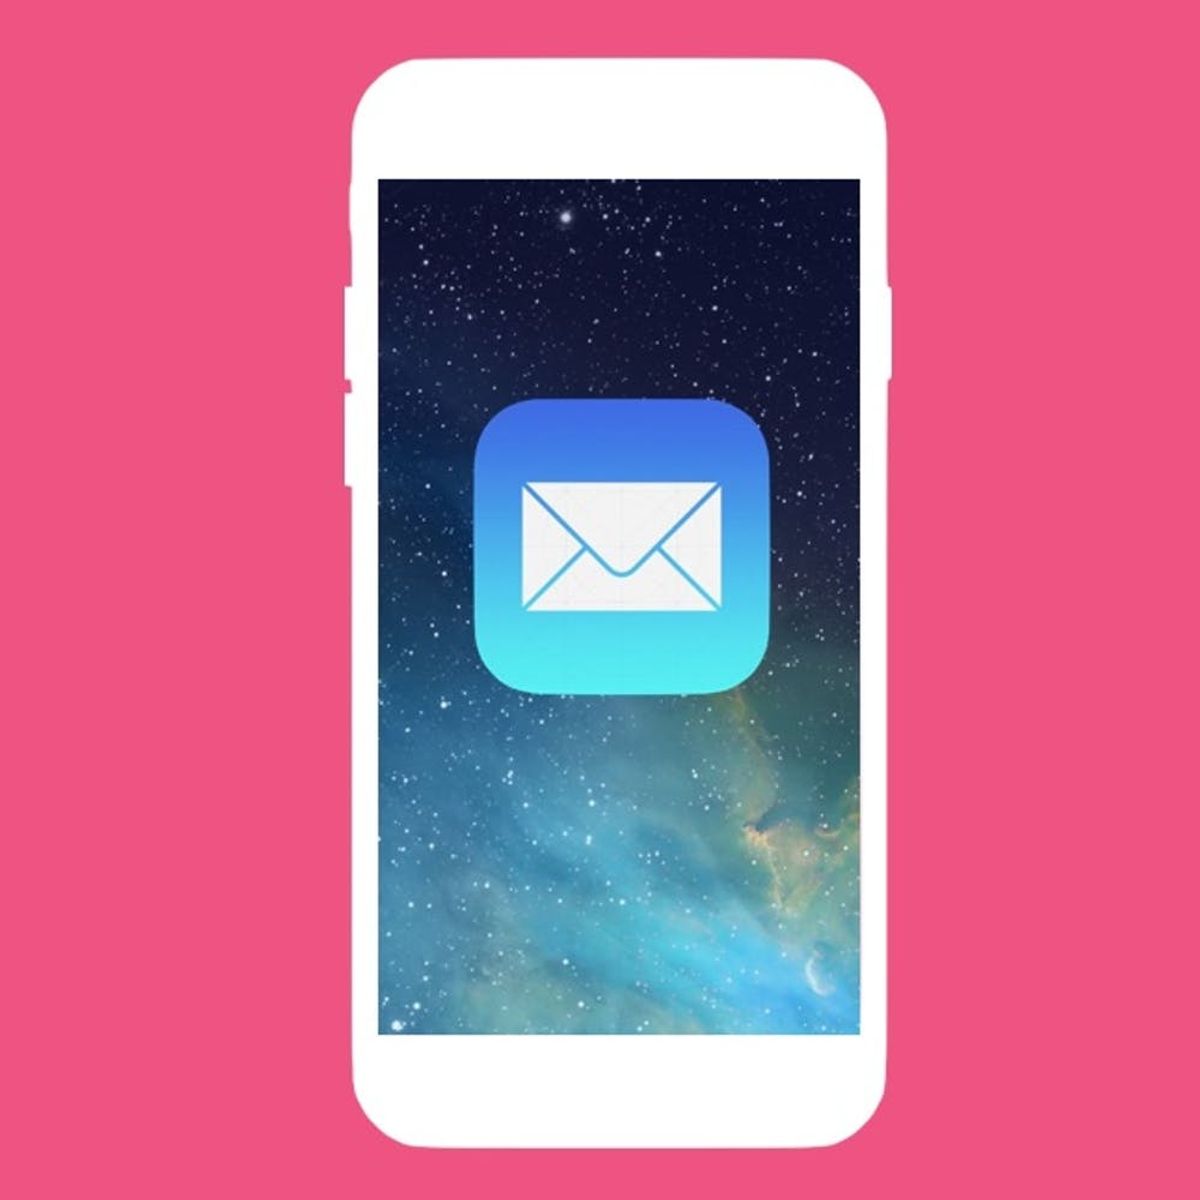 This Is THE Coolest iPhone Trick for Your Email